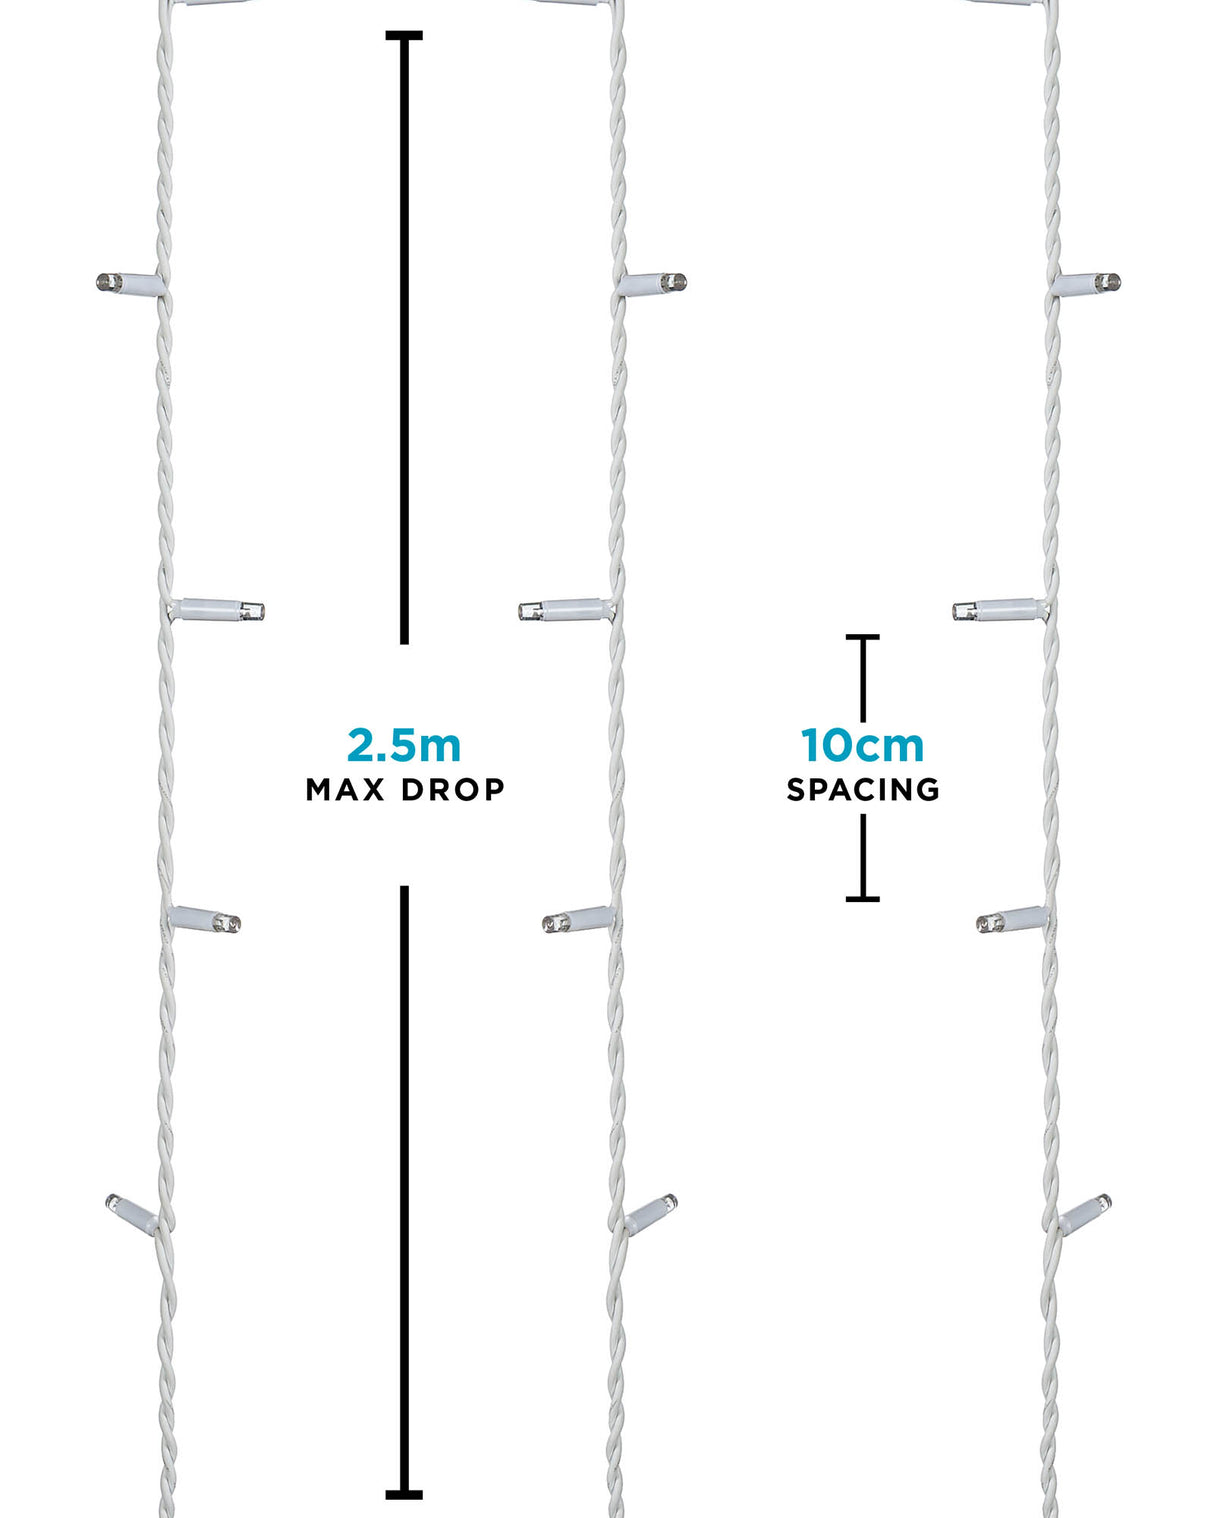 LINK PRO LED Curtain Lights, White Cable, 2.5 m Drop, Warm White